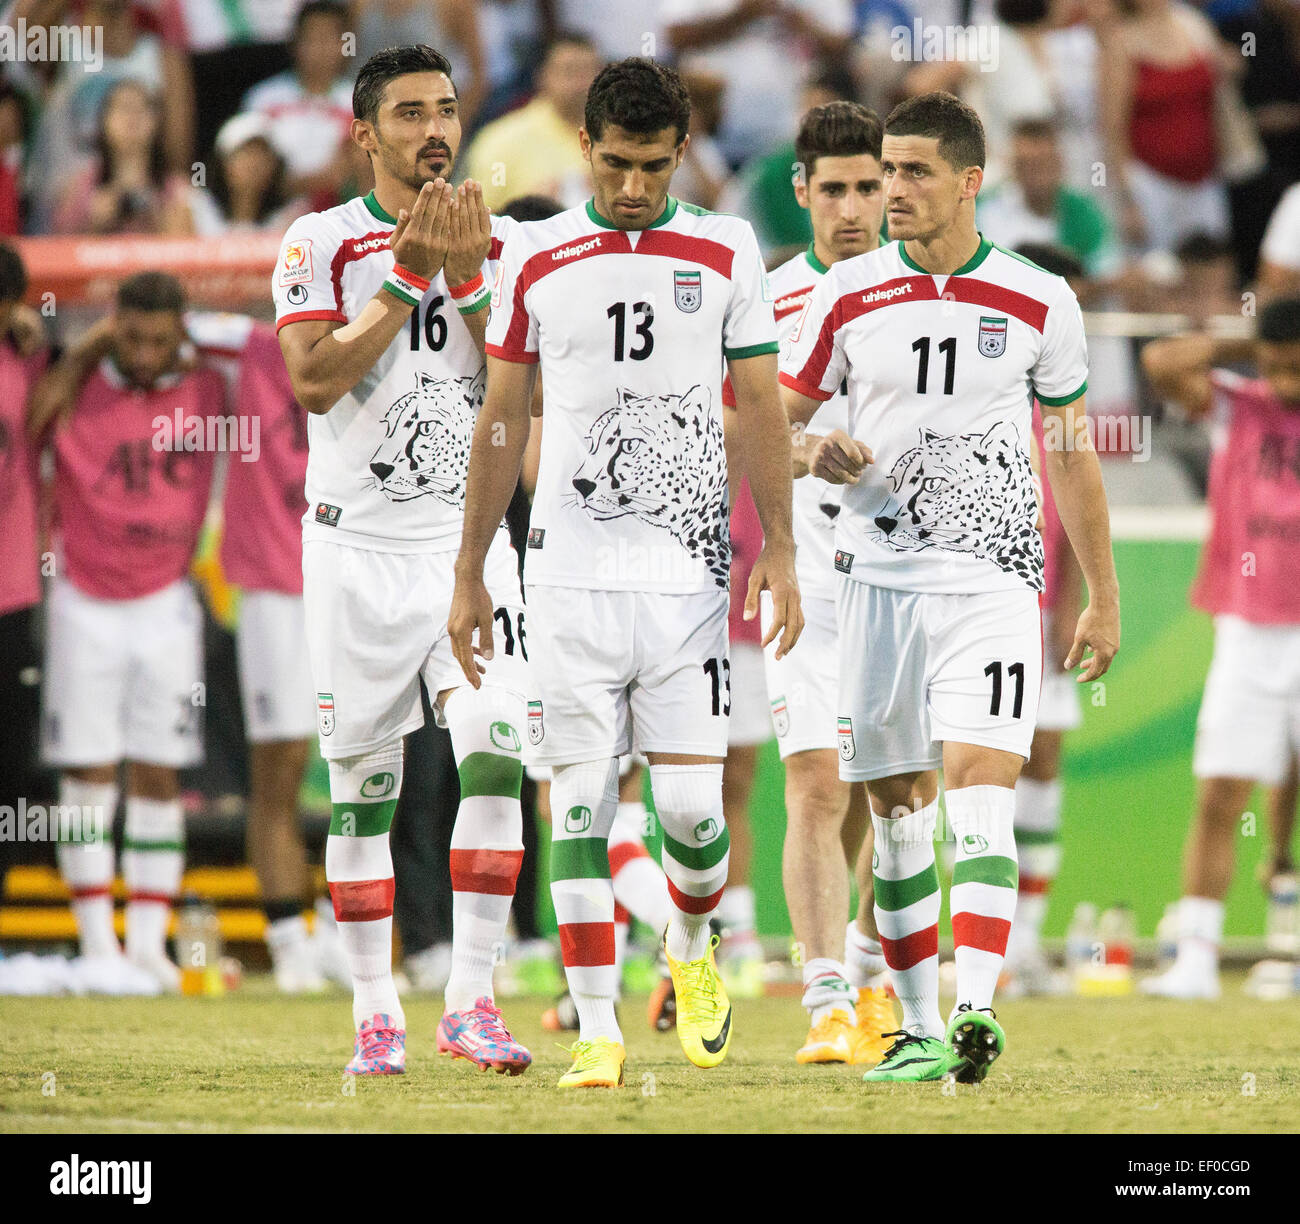 Canberra, Australia. 23rd Jan, 2015. Reza Ghoochannejhad (16) Vahid Amiri (13) and Vouria Ghafouri (11) of Iran get ready for overtime action against Iraq in the FIFA Asian Football Confederation 2015 Asian Cup quarter-final game played in Canberra Stadium, Canberra, Australia © Action Plus Sports/Alamy Live News Stock Photo